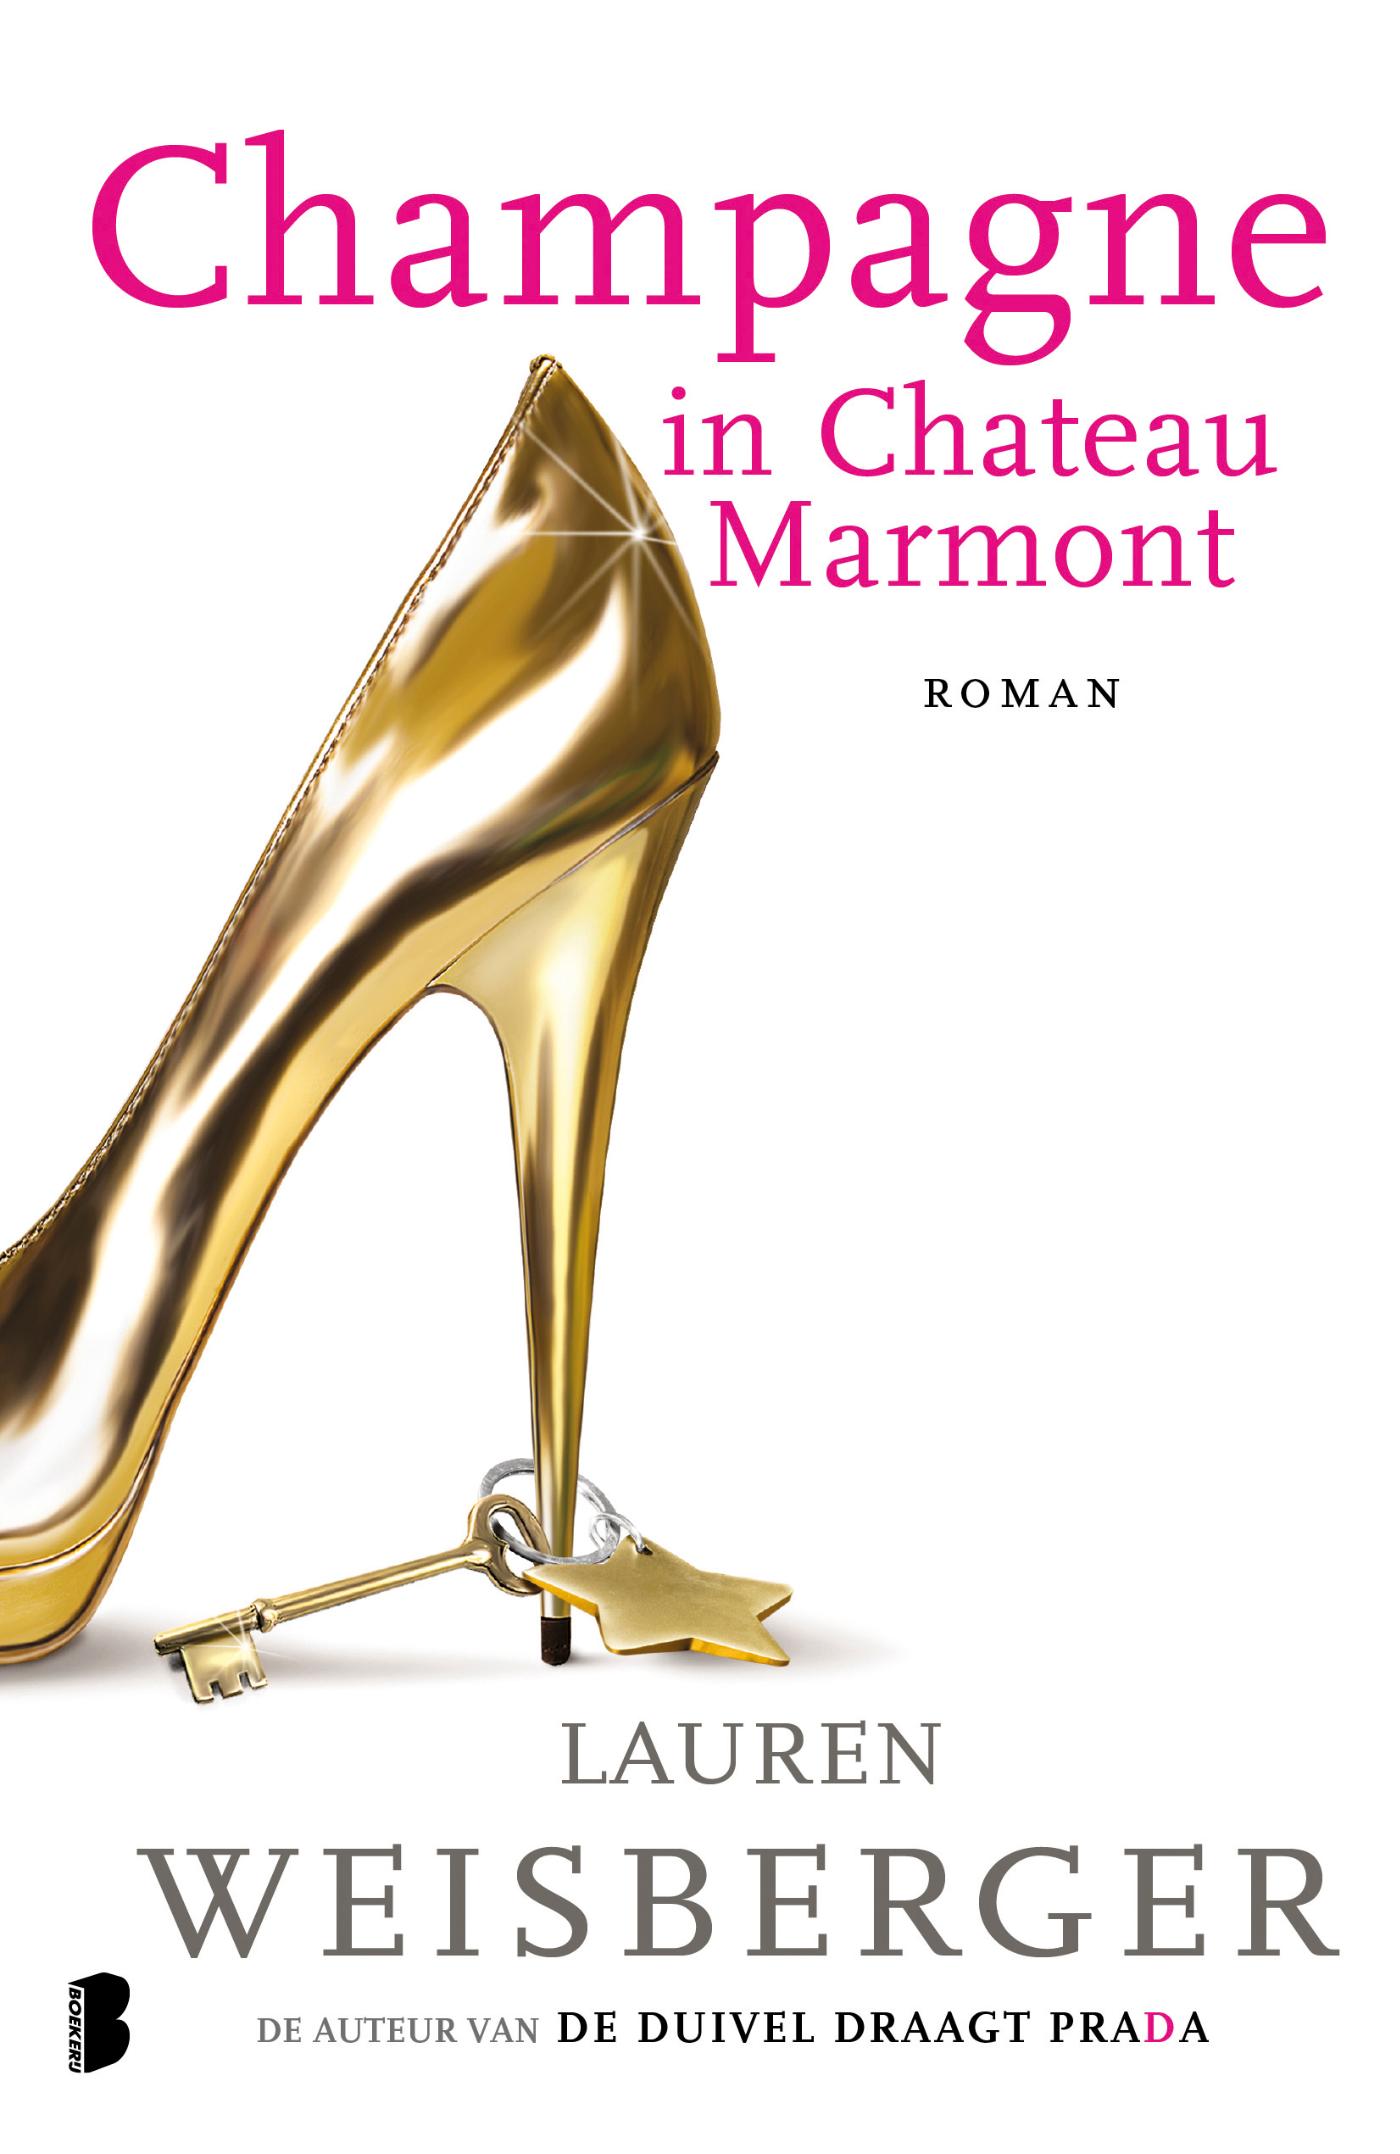 Champagne in Chateau Marmont (Ebook)